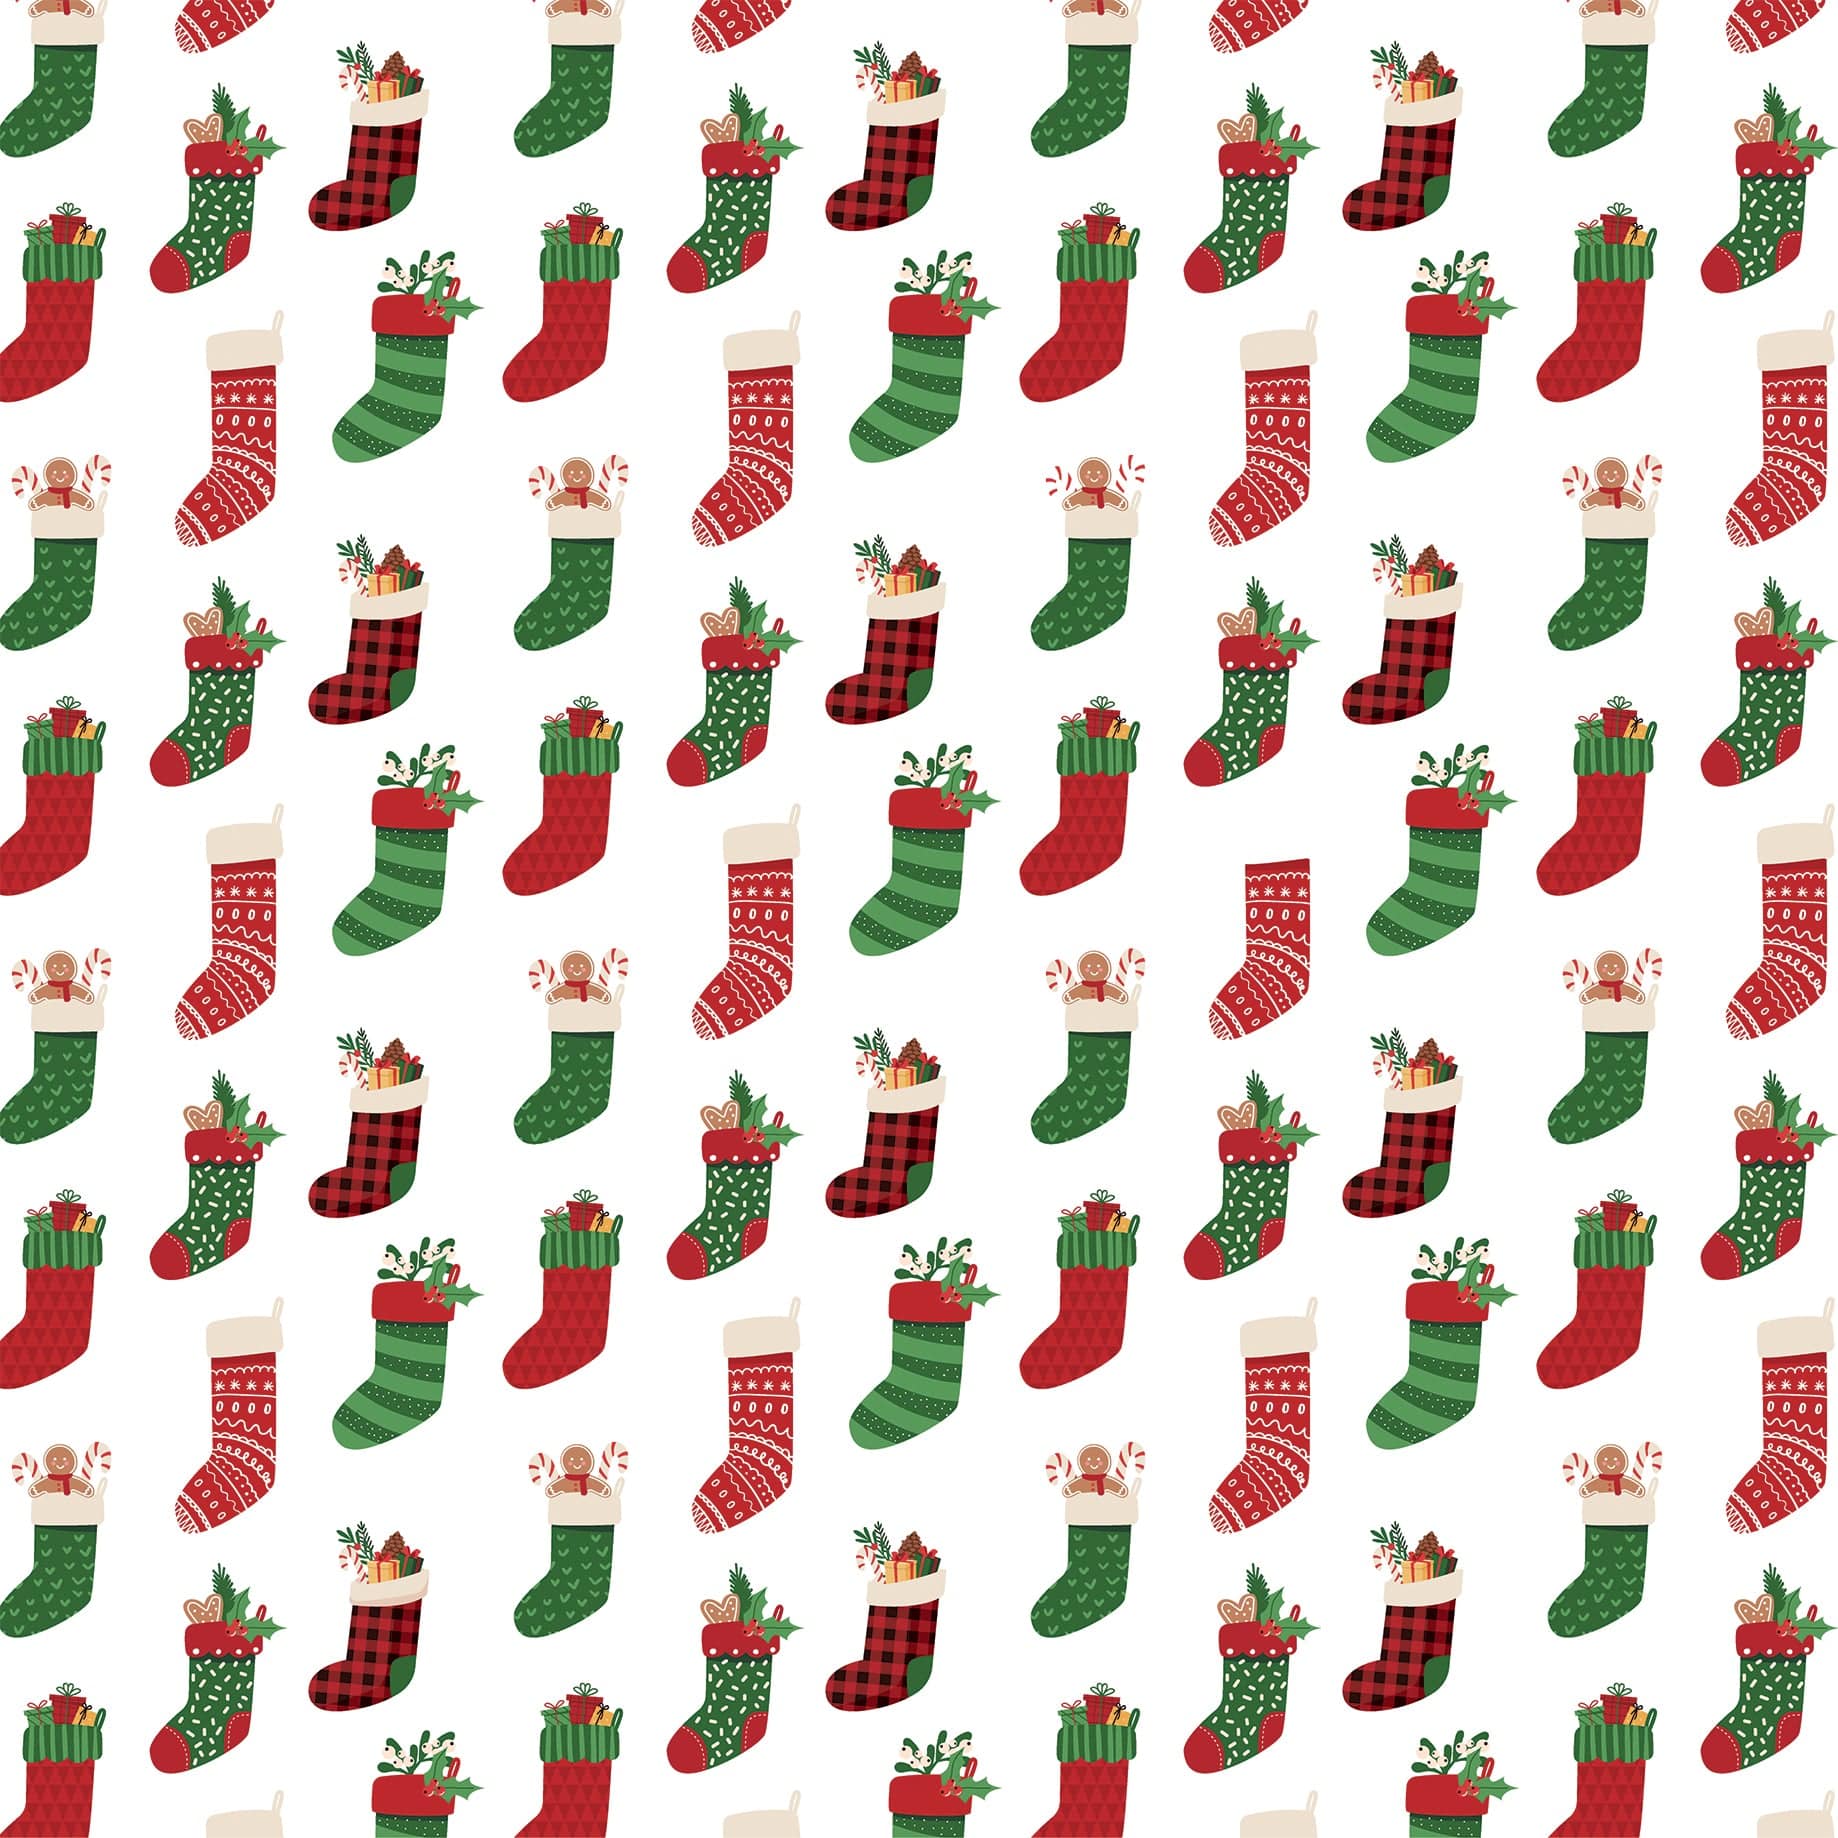 The Magic of Christmas Collection Stuffed Stockings 12 x 12 Double-Sided Scrapbook Paper by Echo Park Paper